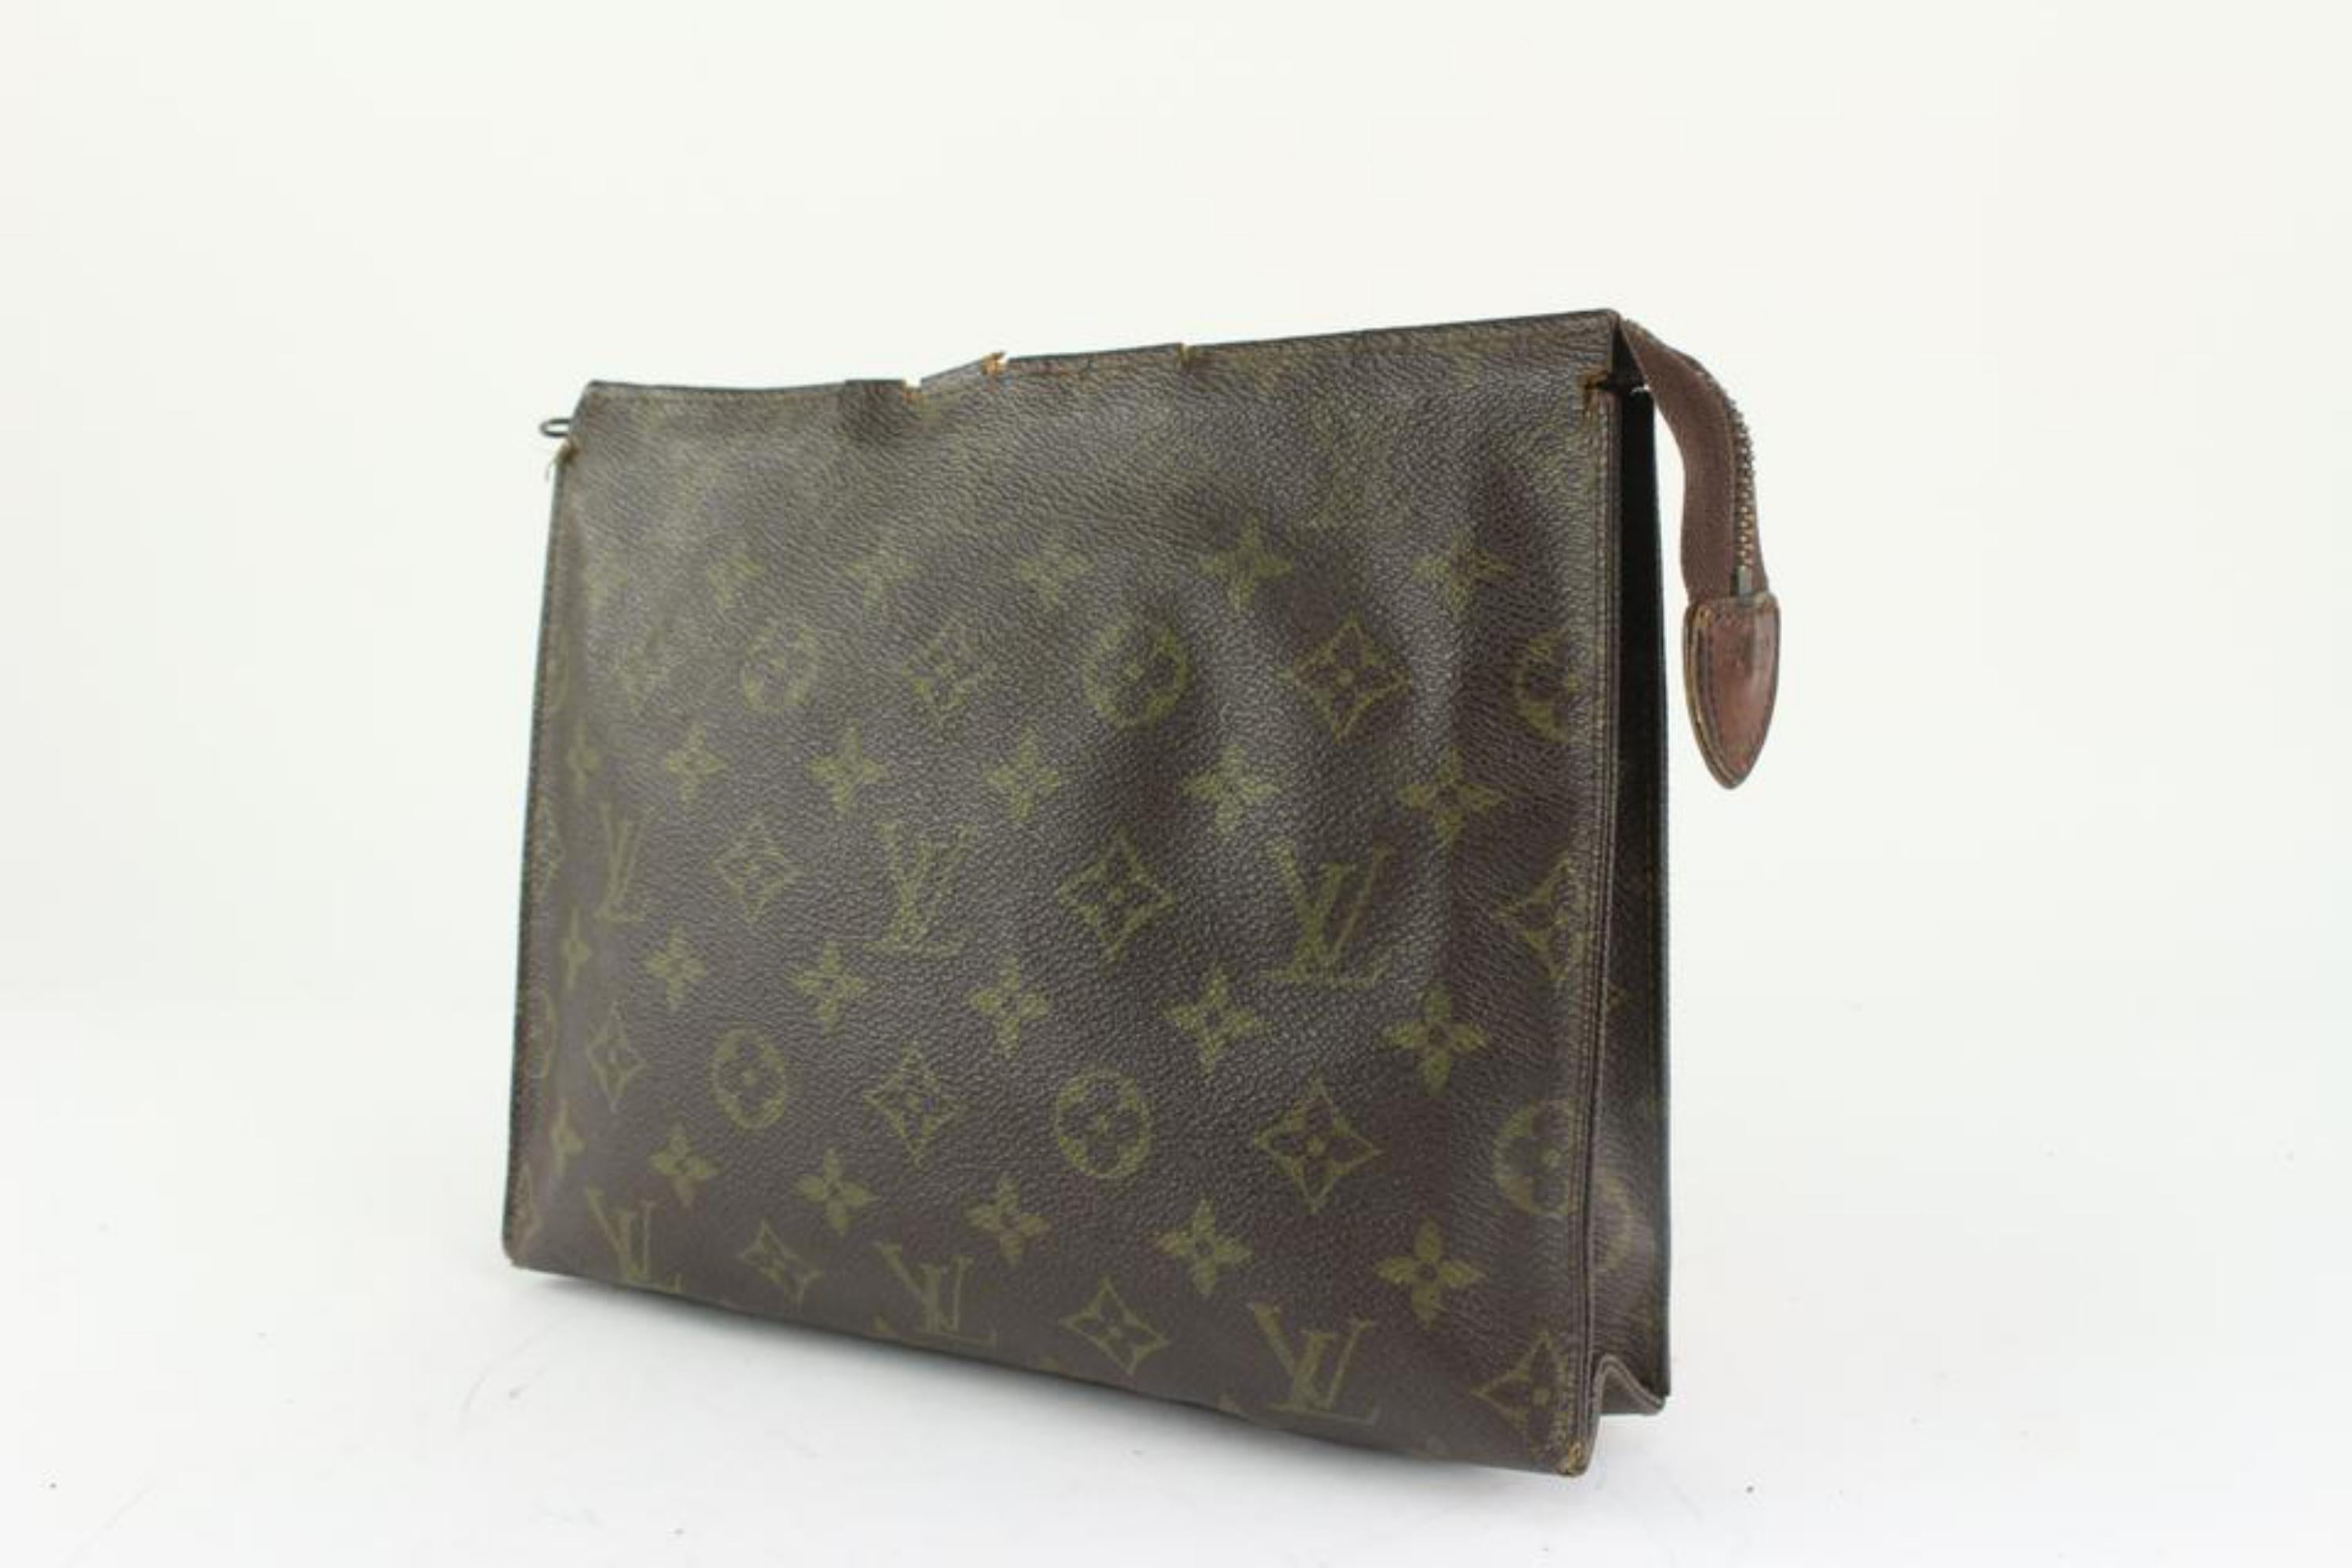 Louis Vuitton Discontinued Monogram Toiletry Pouch 26 Poche Toilette 1216lv49
Date Code/Serial Number: 842
Made In: France
Measurements: Length:  9.5